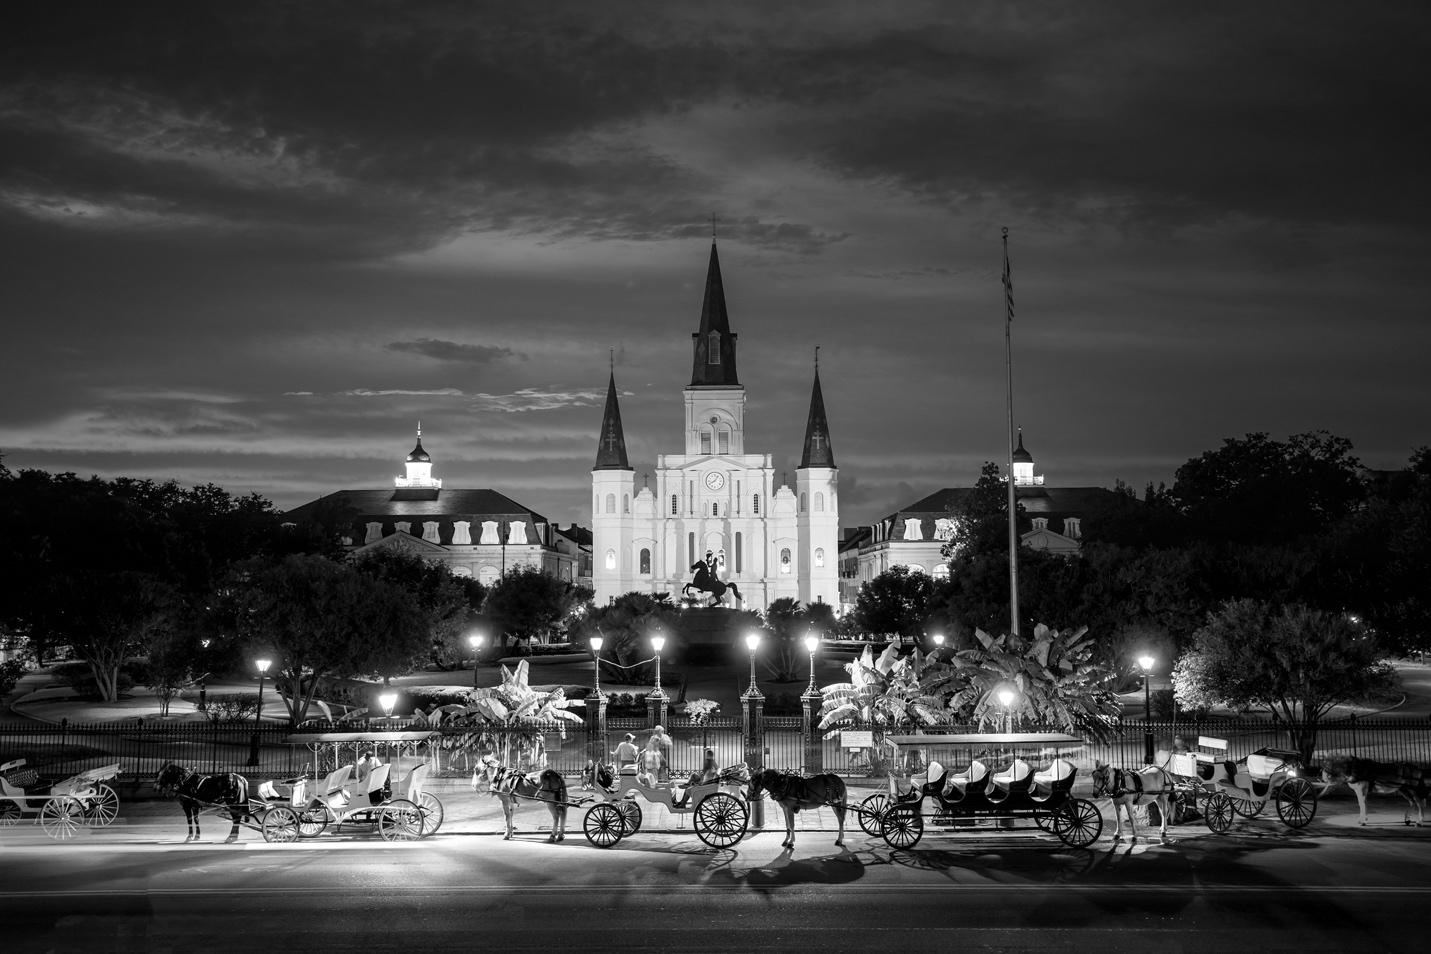 The Saint Louis Cathedral and Jackson Square are stops on many New Orleans city tours (photo: f11photo)